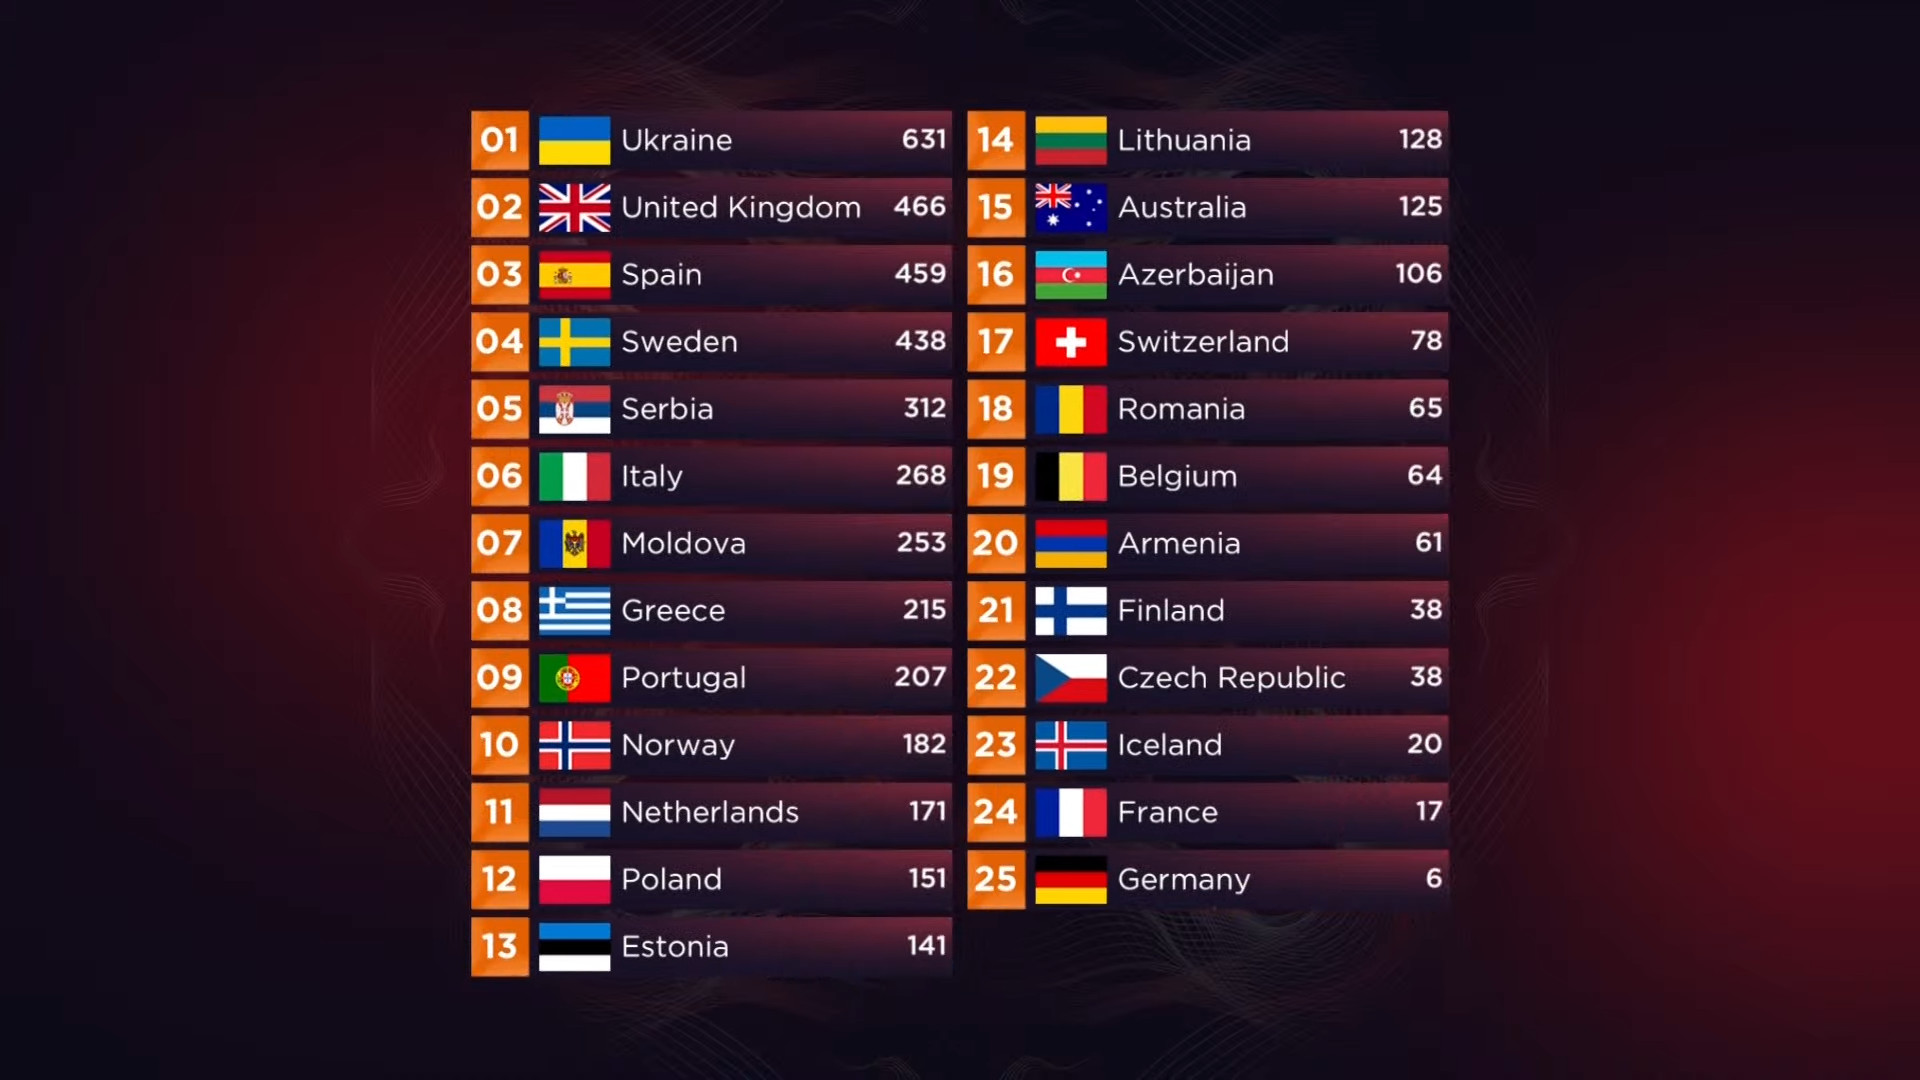 Scoreboard of the 2022 Eurovision Song Contest